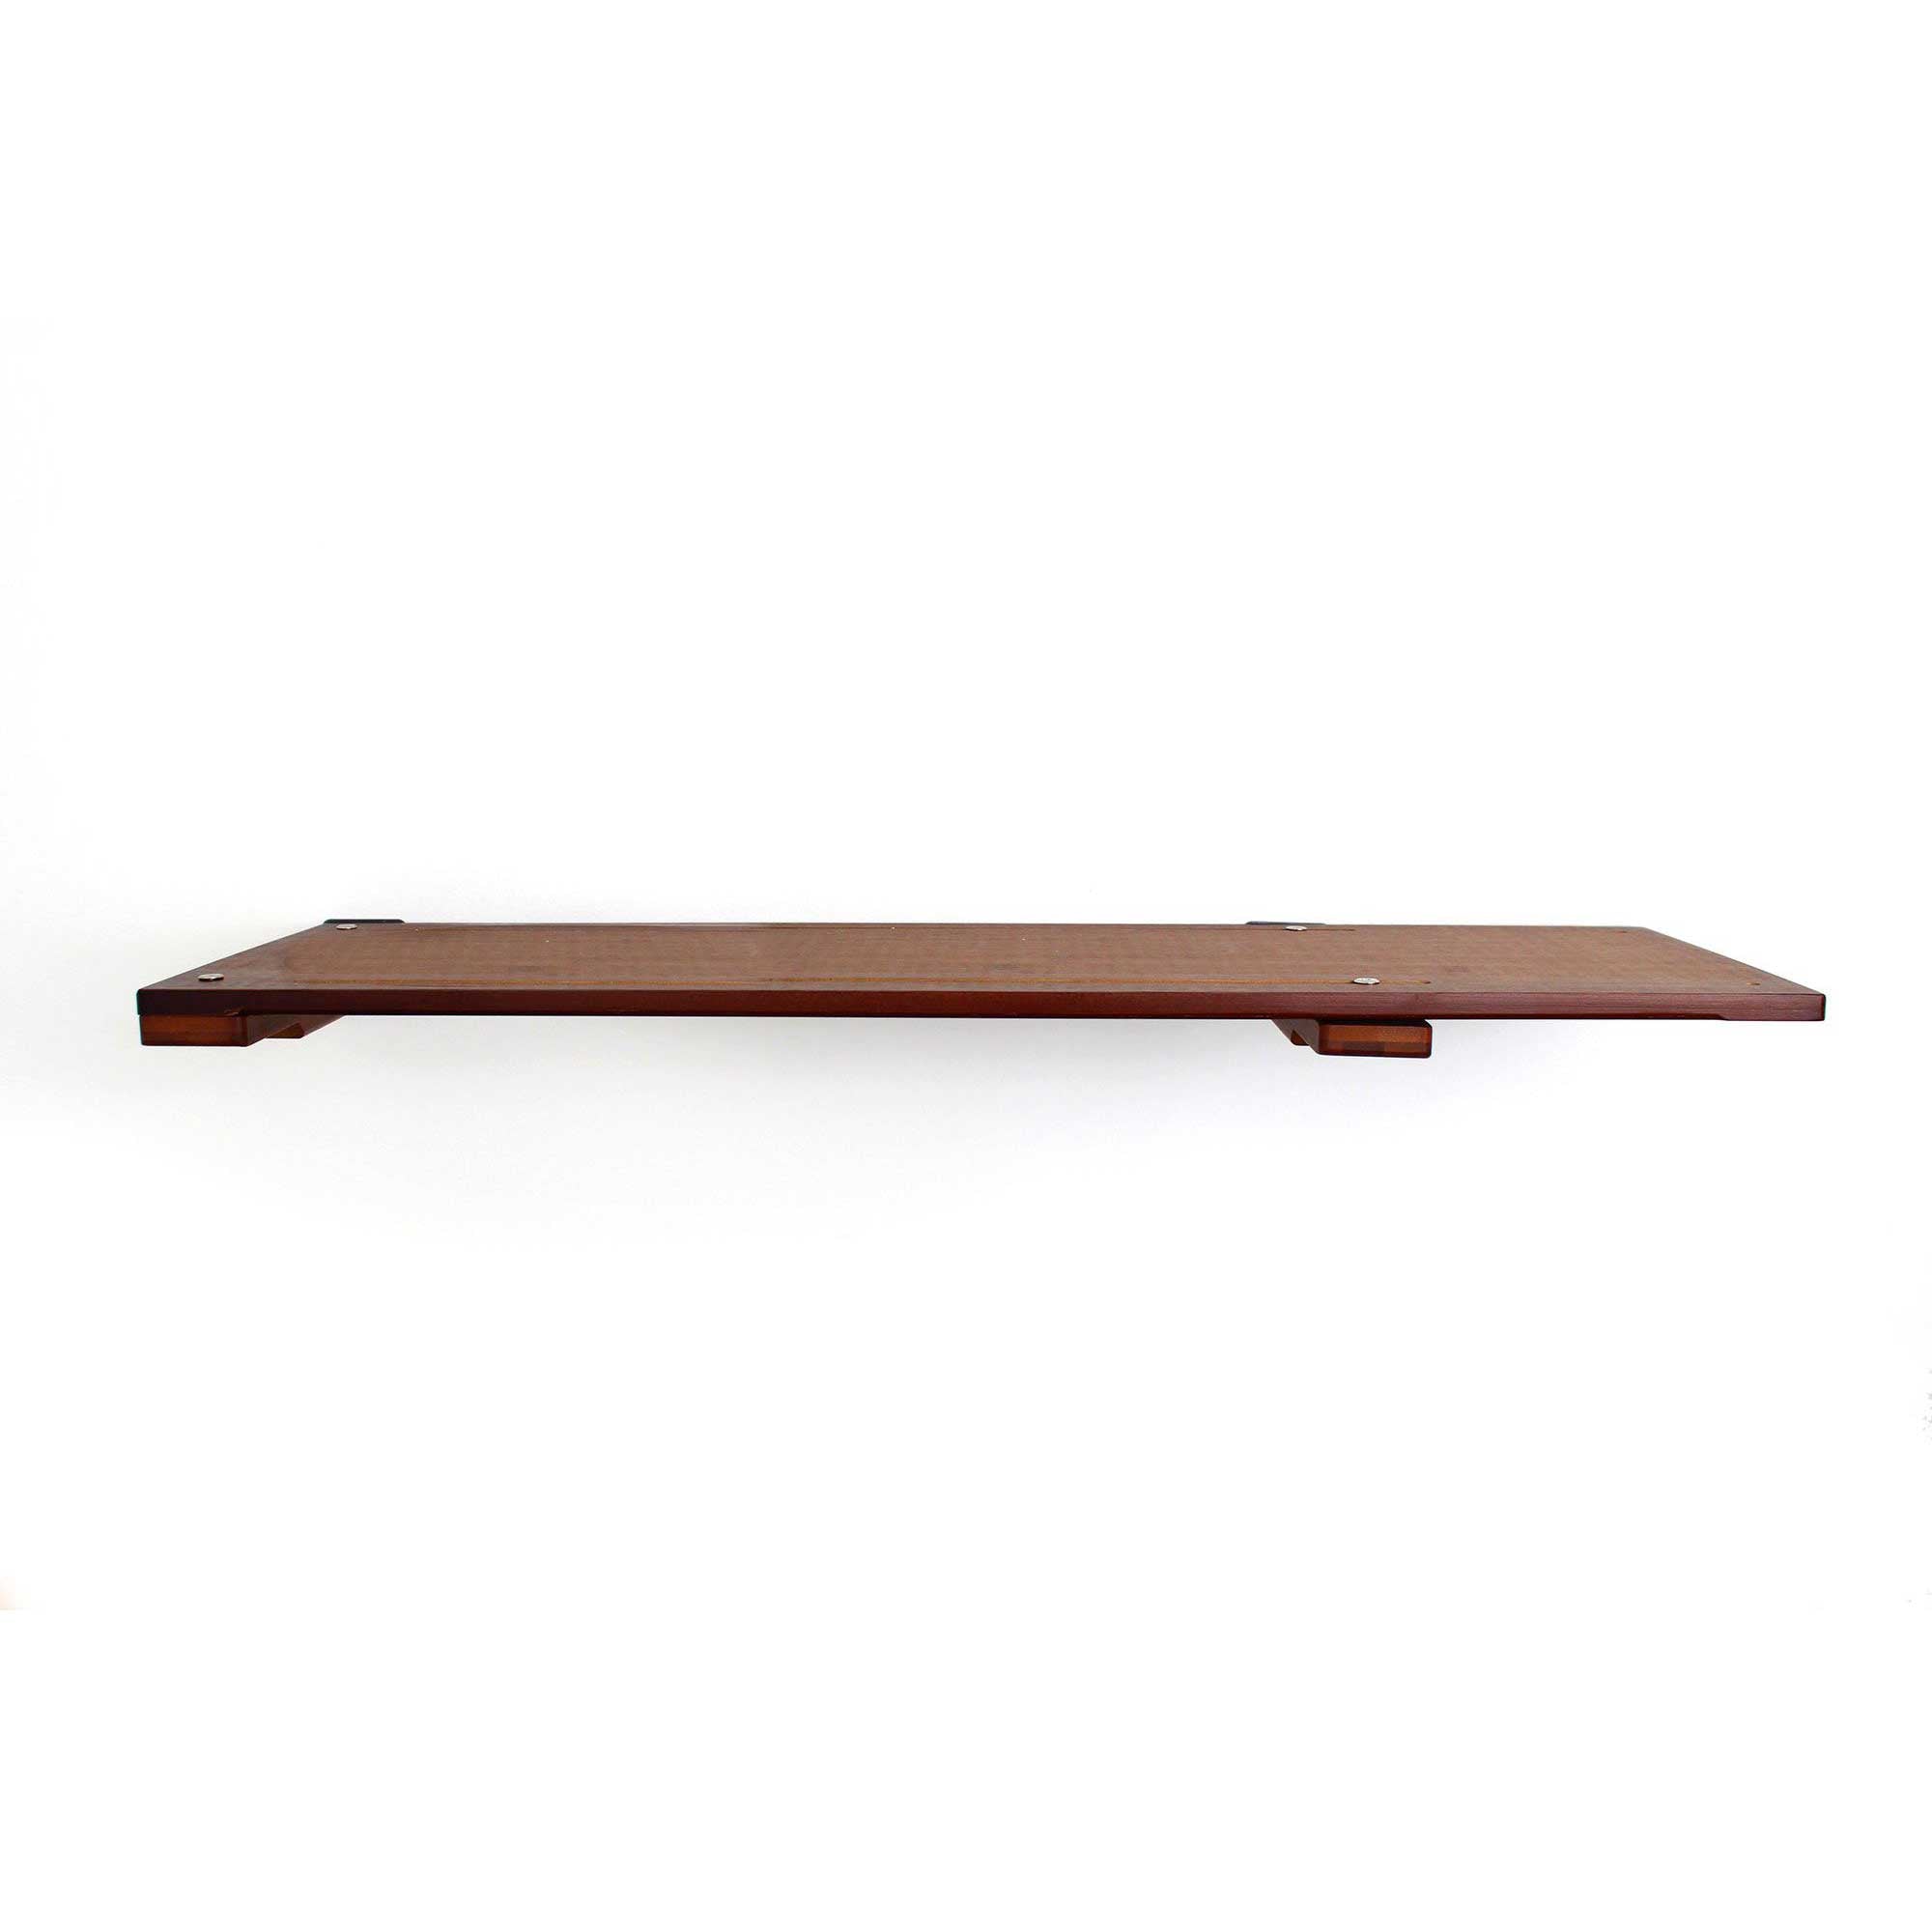 Updated slotted 34” wall cat shelf made of English Chestnut